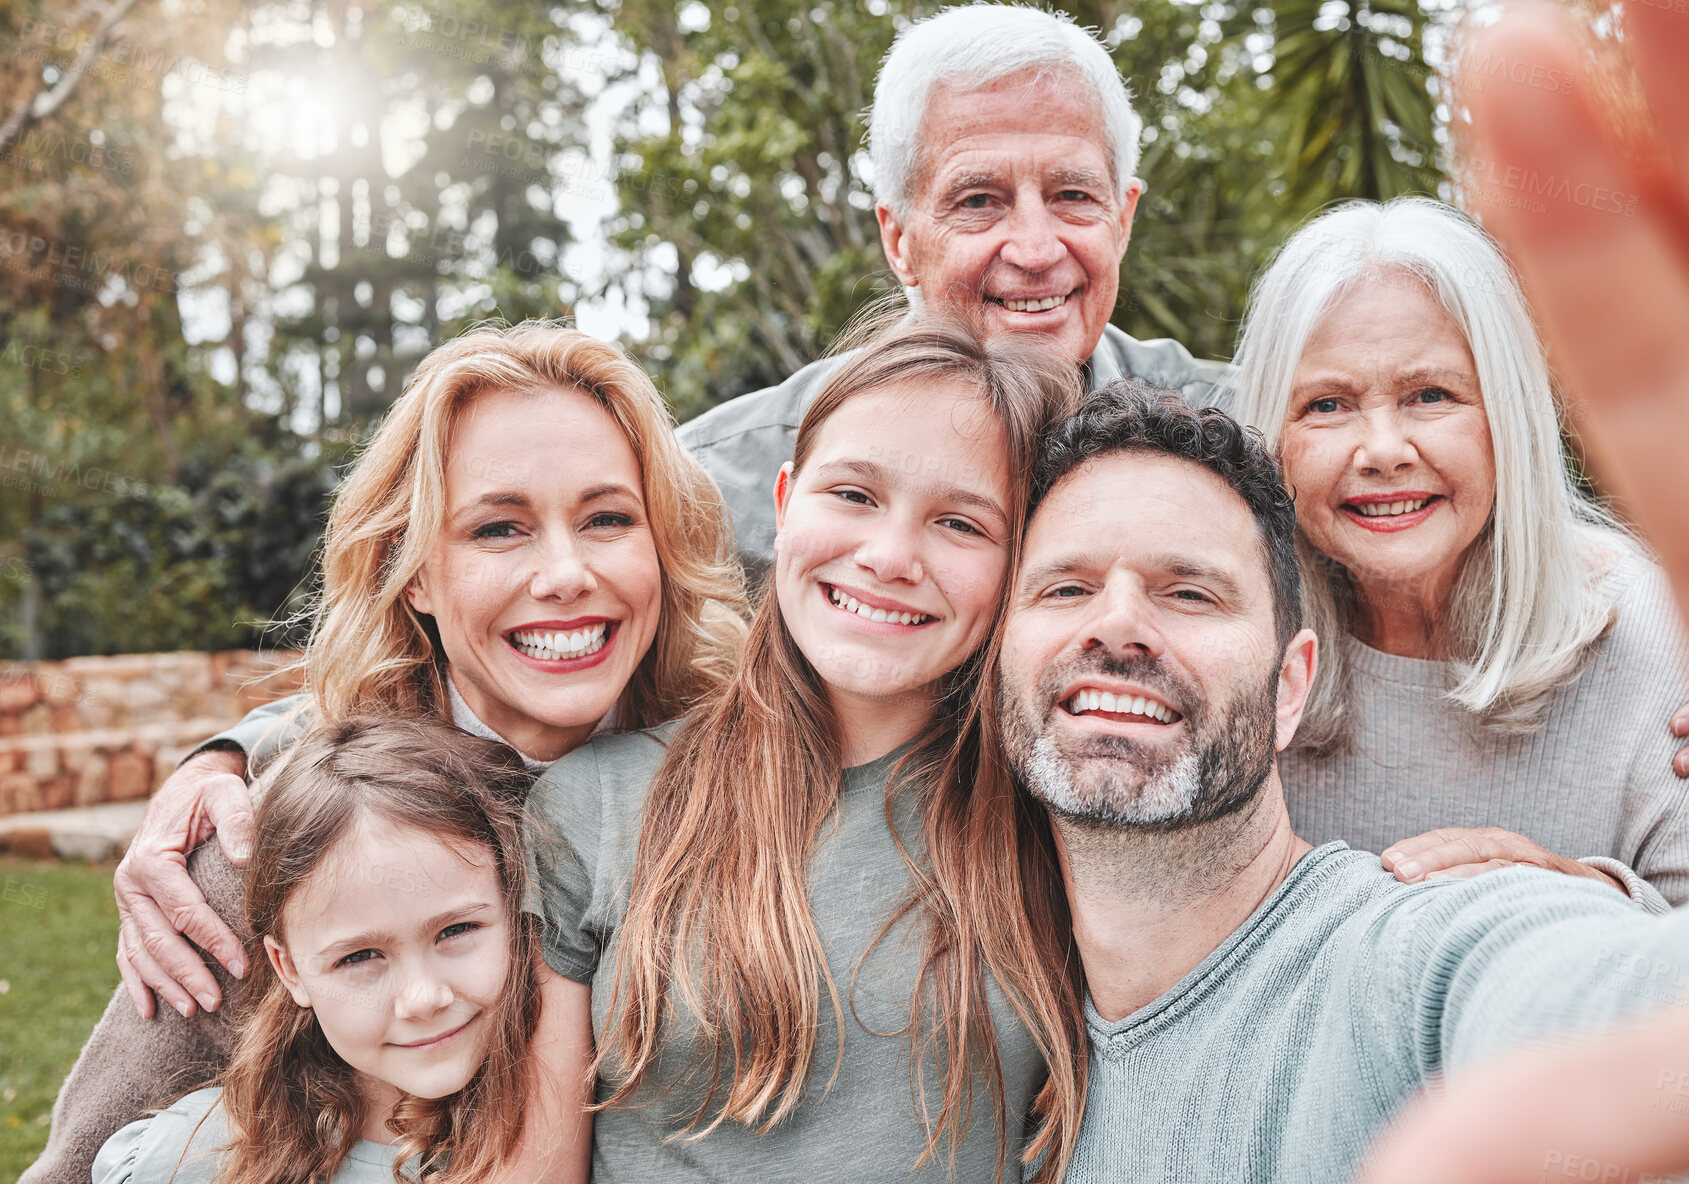 Buy stock photo Big family selfie, smile and portrait in park with happiness, love and bond for social media, app or internet post. Father, mother and daughter with grandparents, profile picture or backyard garden